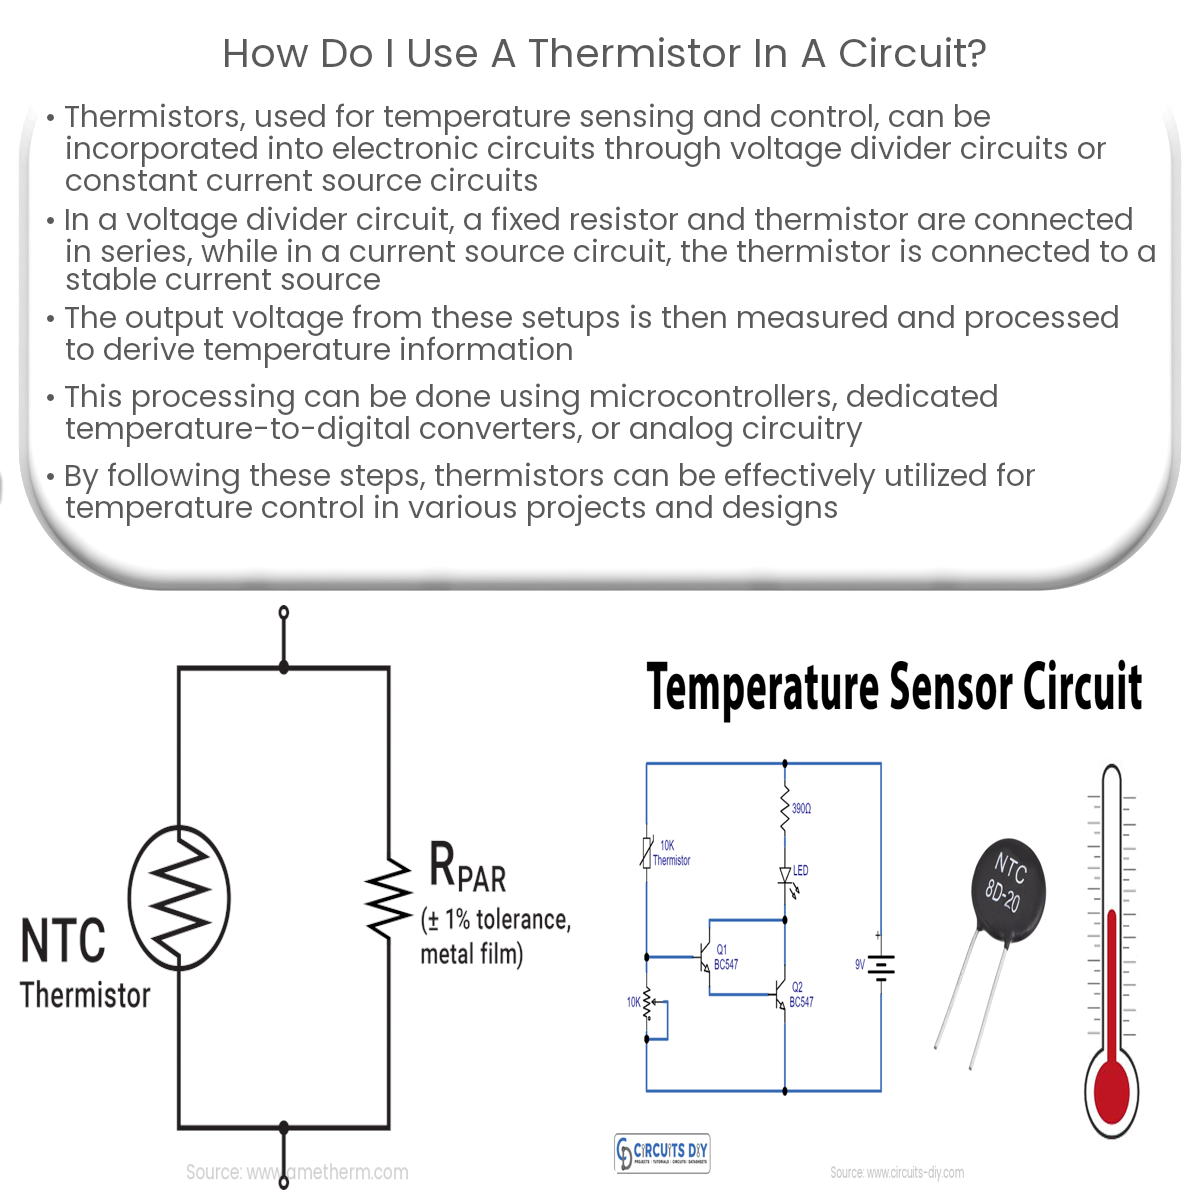 How do I use a thermistor in a circuit?